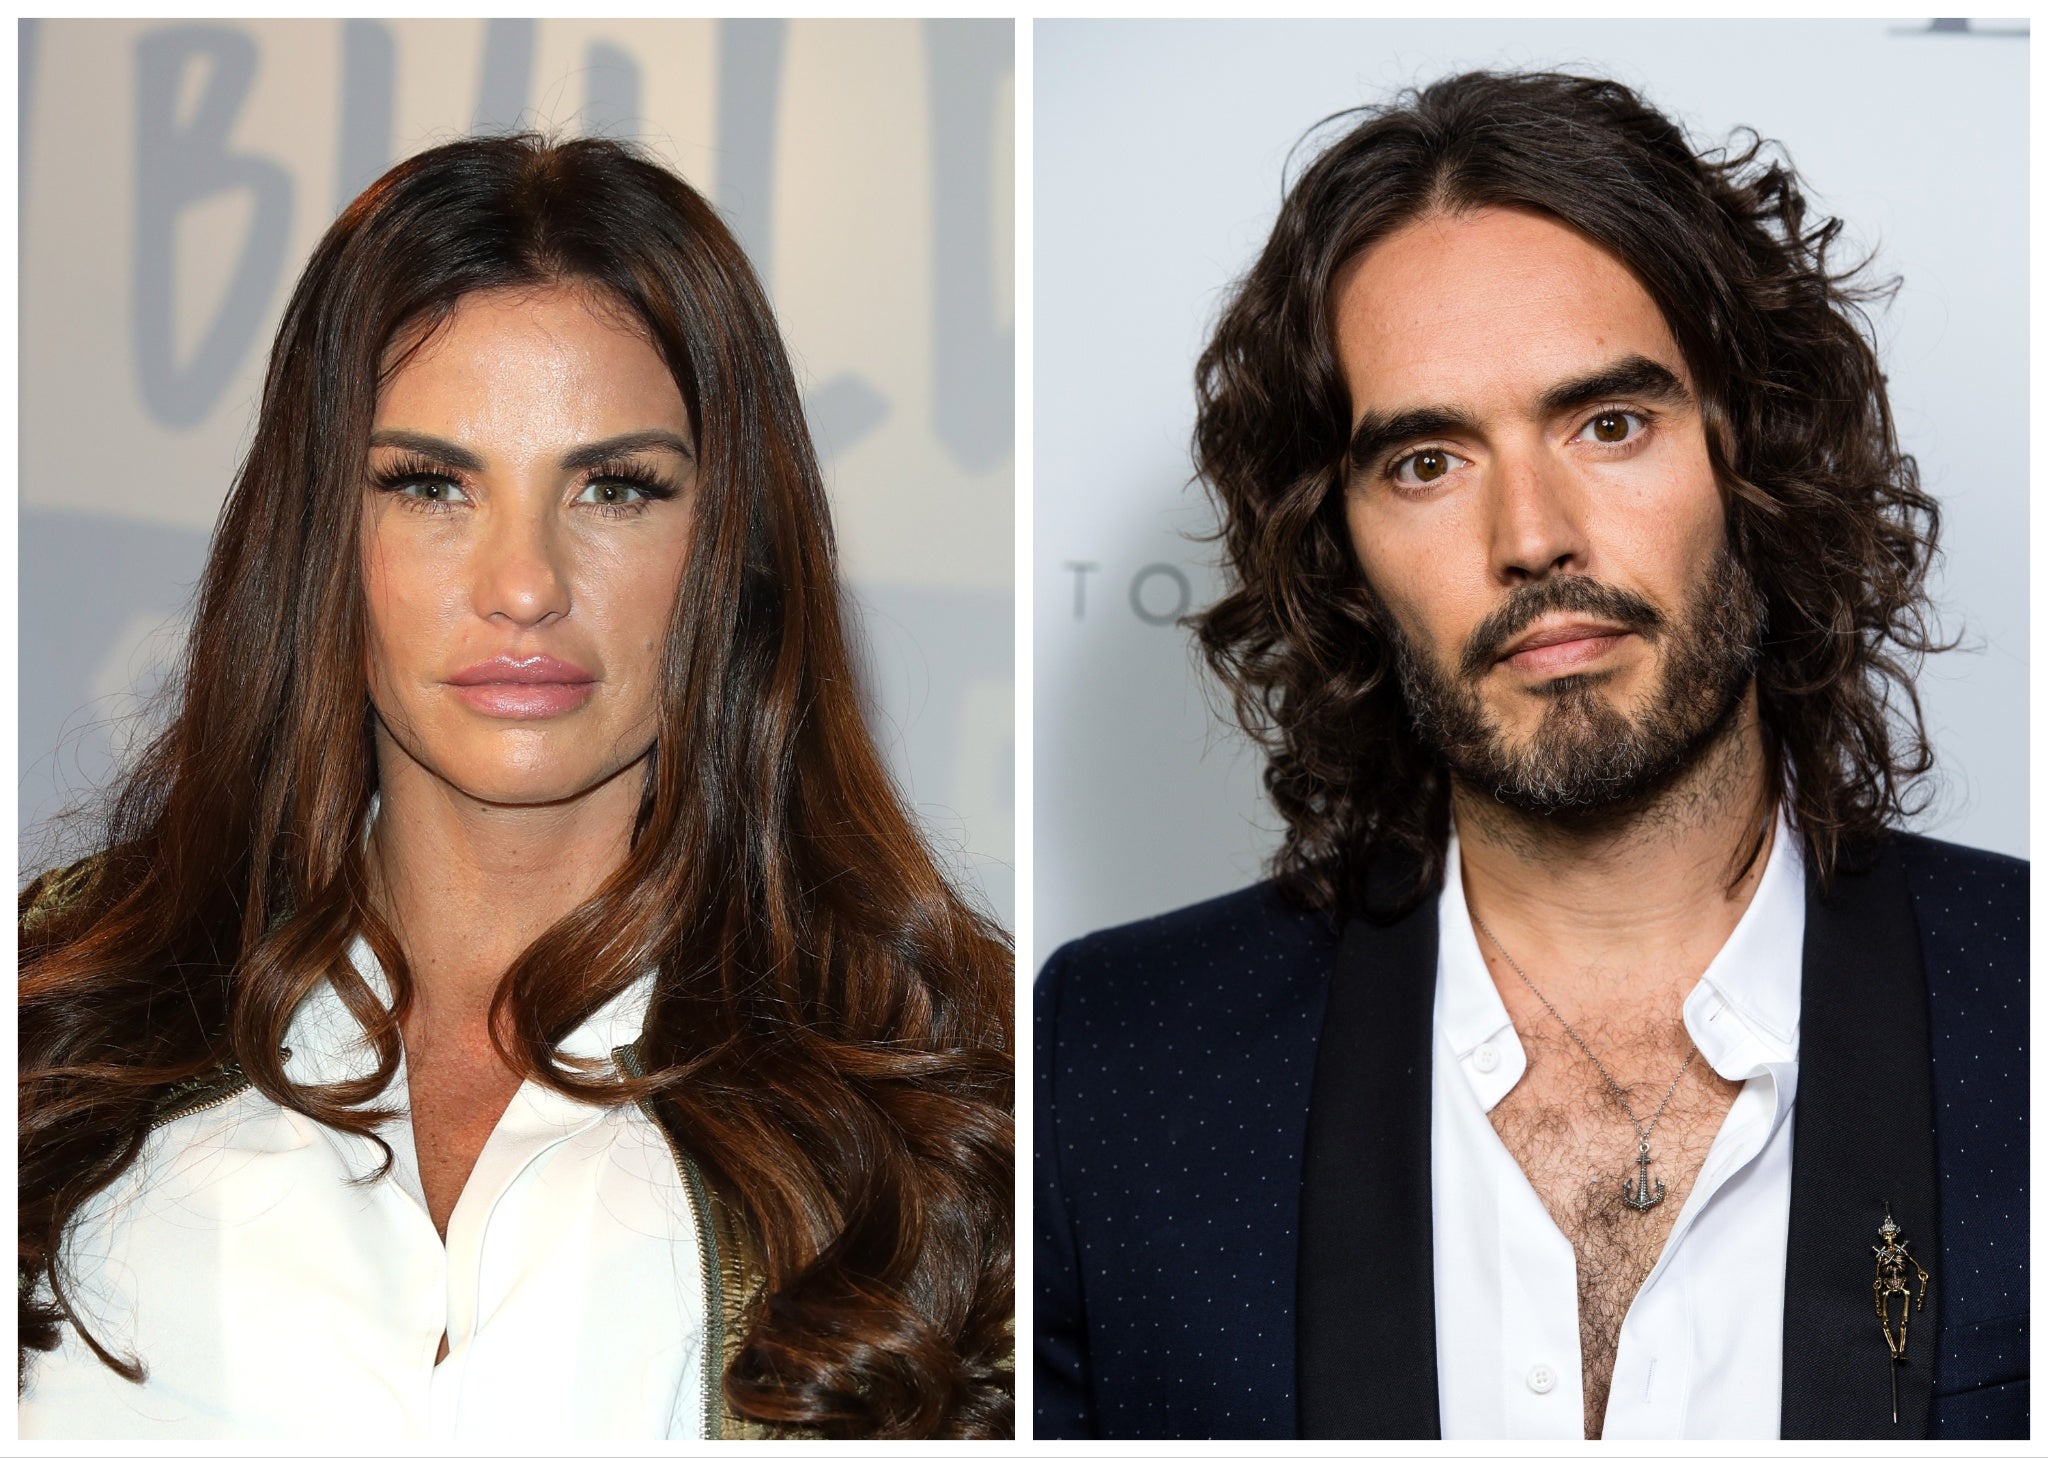 Katie Price recalled one encounter with Russell Brand at LAX airport